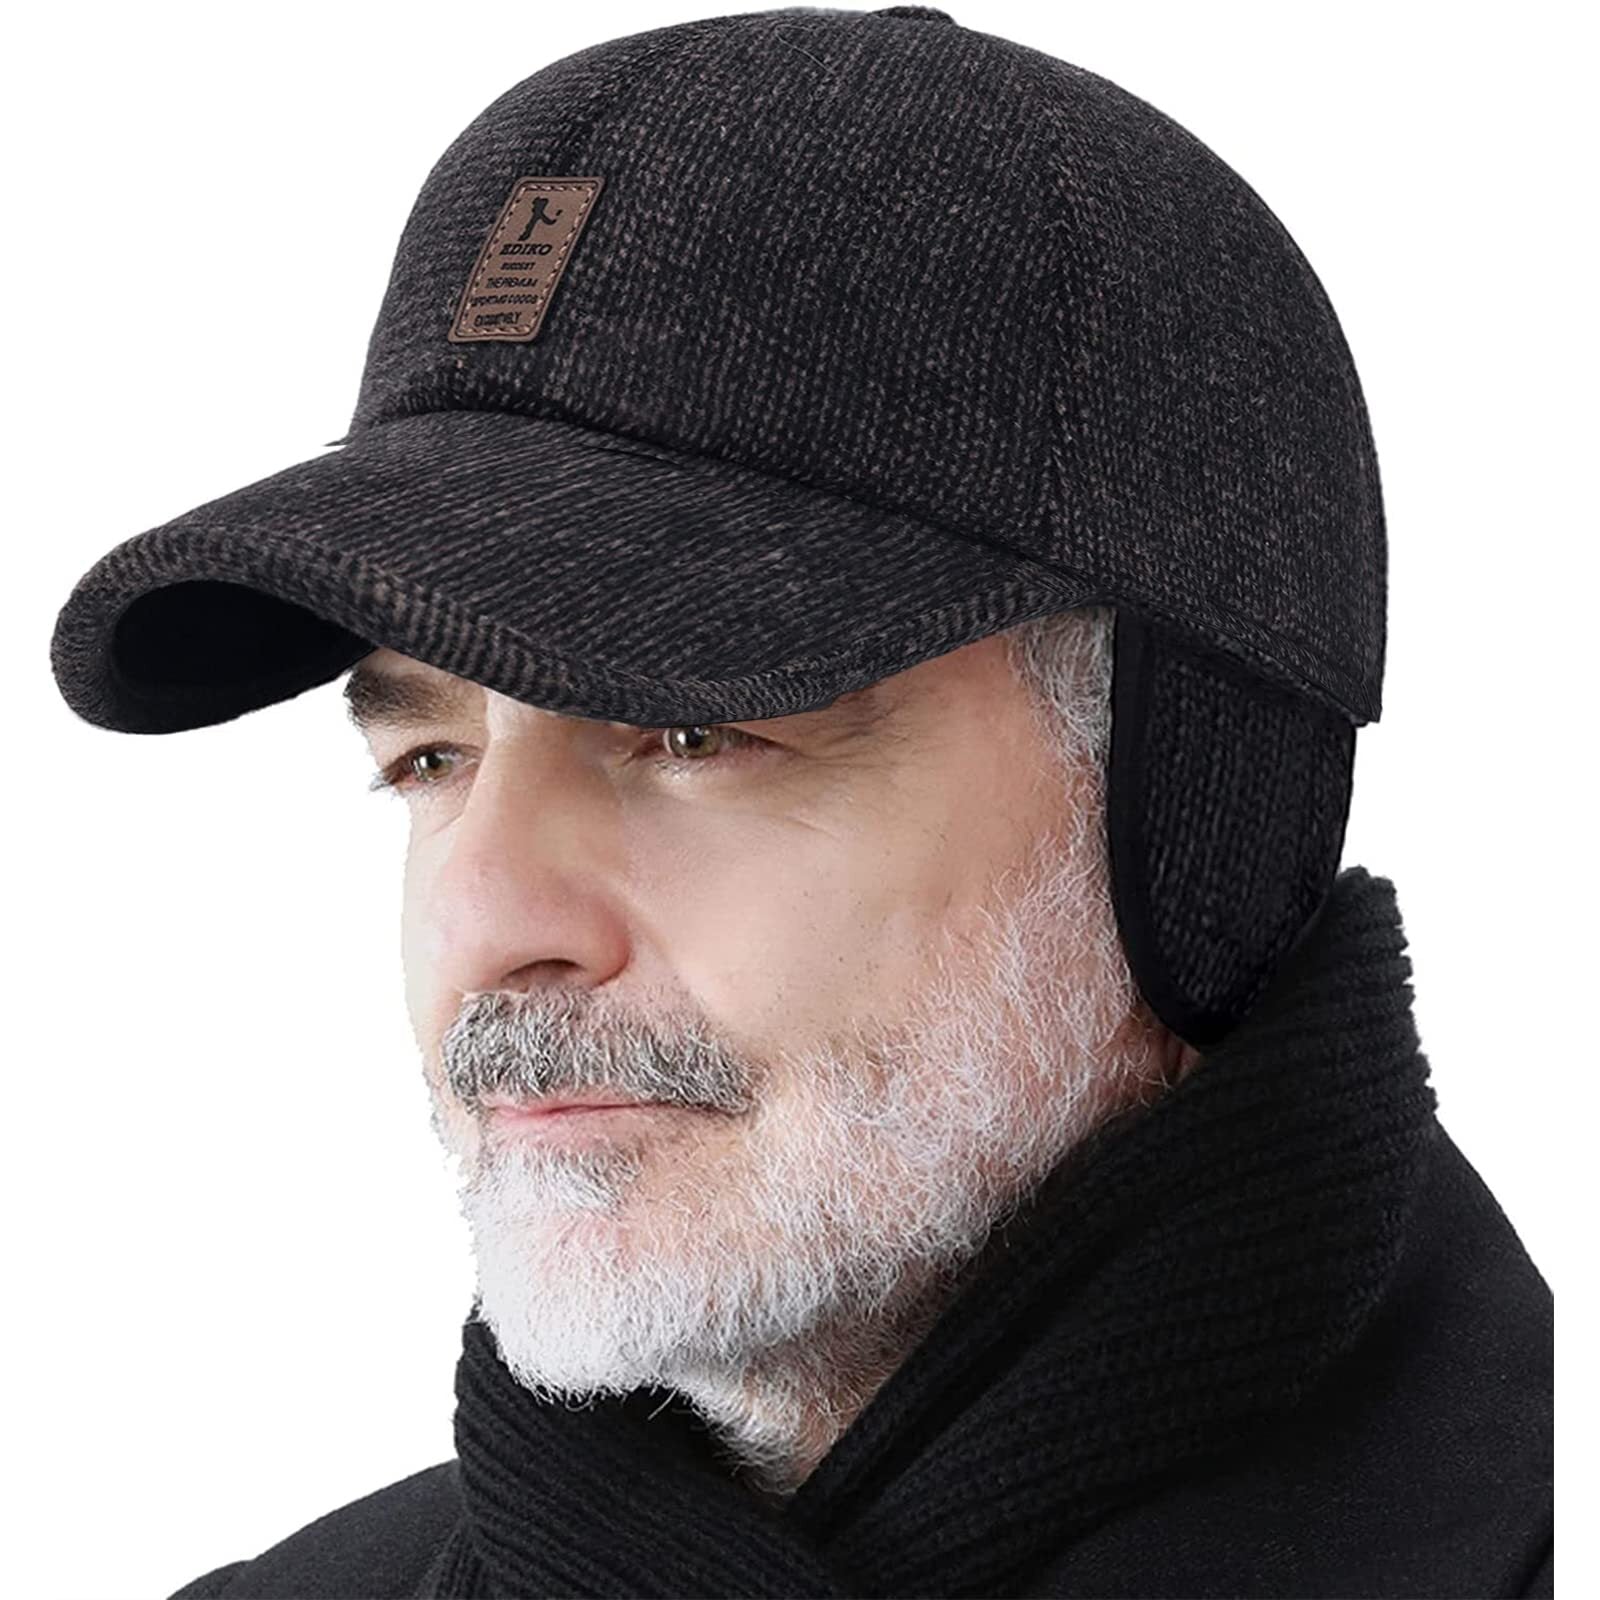 Men's Winter Baseball Cap--With Ear Muffs,Adjustable, thickened and warm